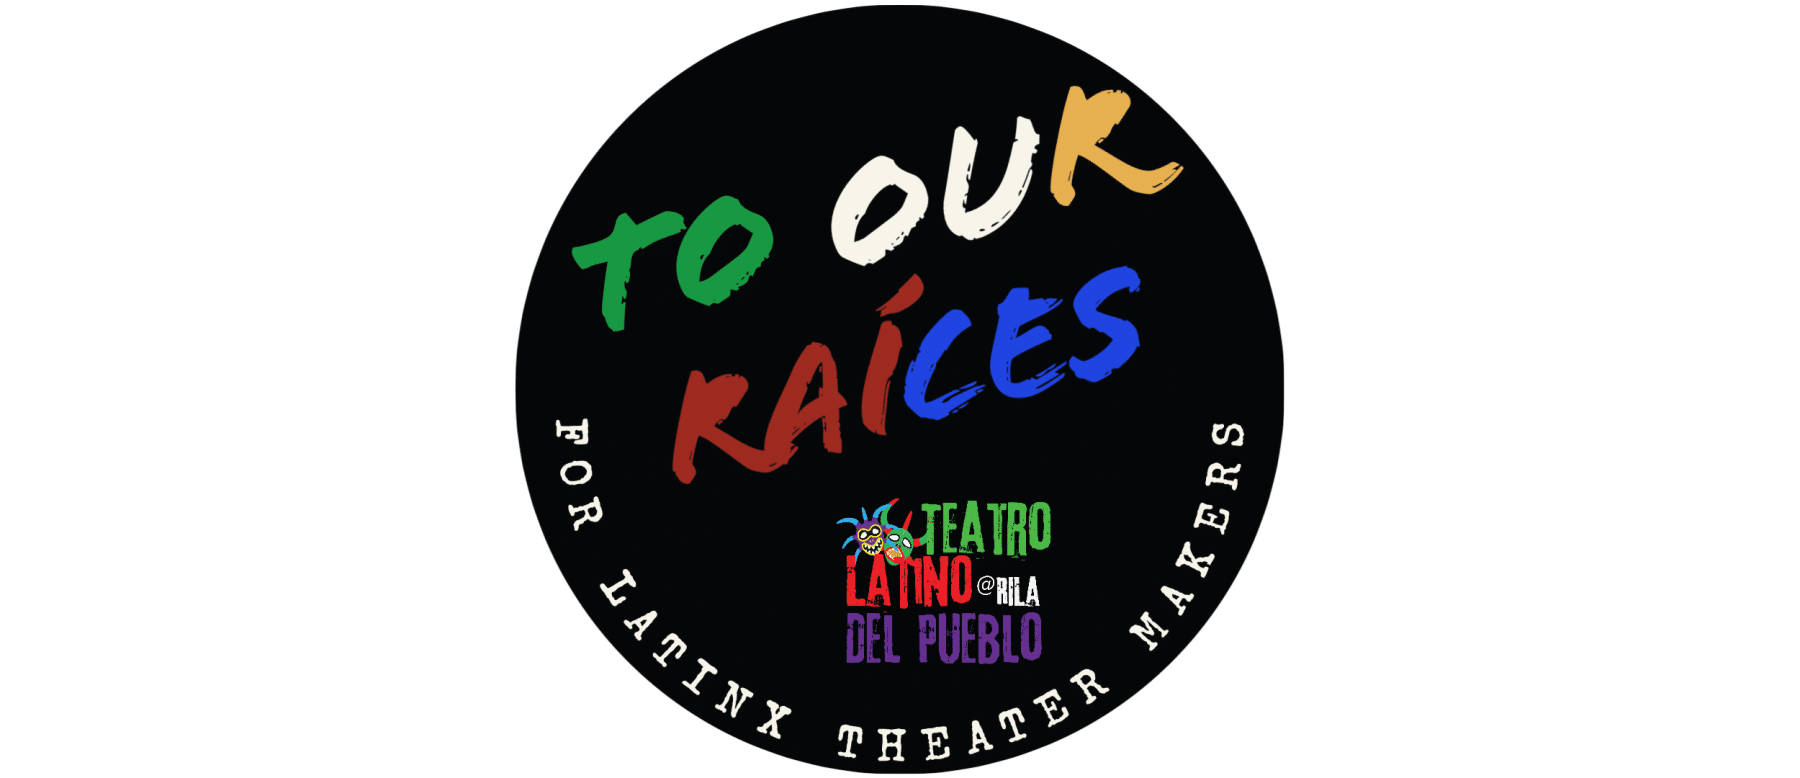 Rhode Island News: Rhode Island Latino Arts announces weekly pláticas about Latinx experience